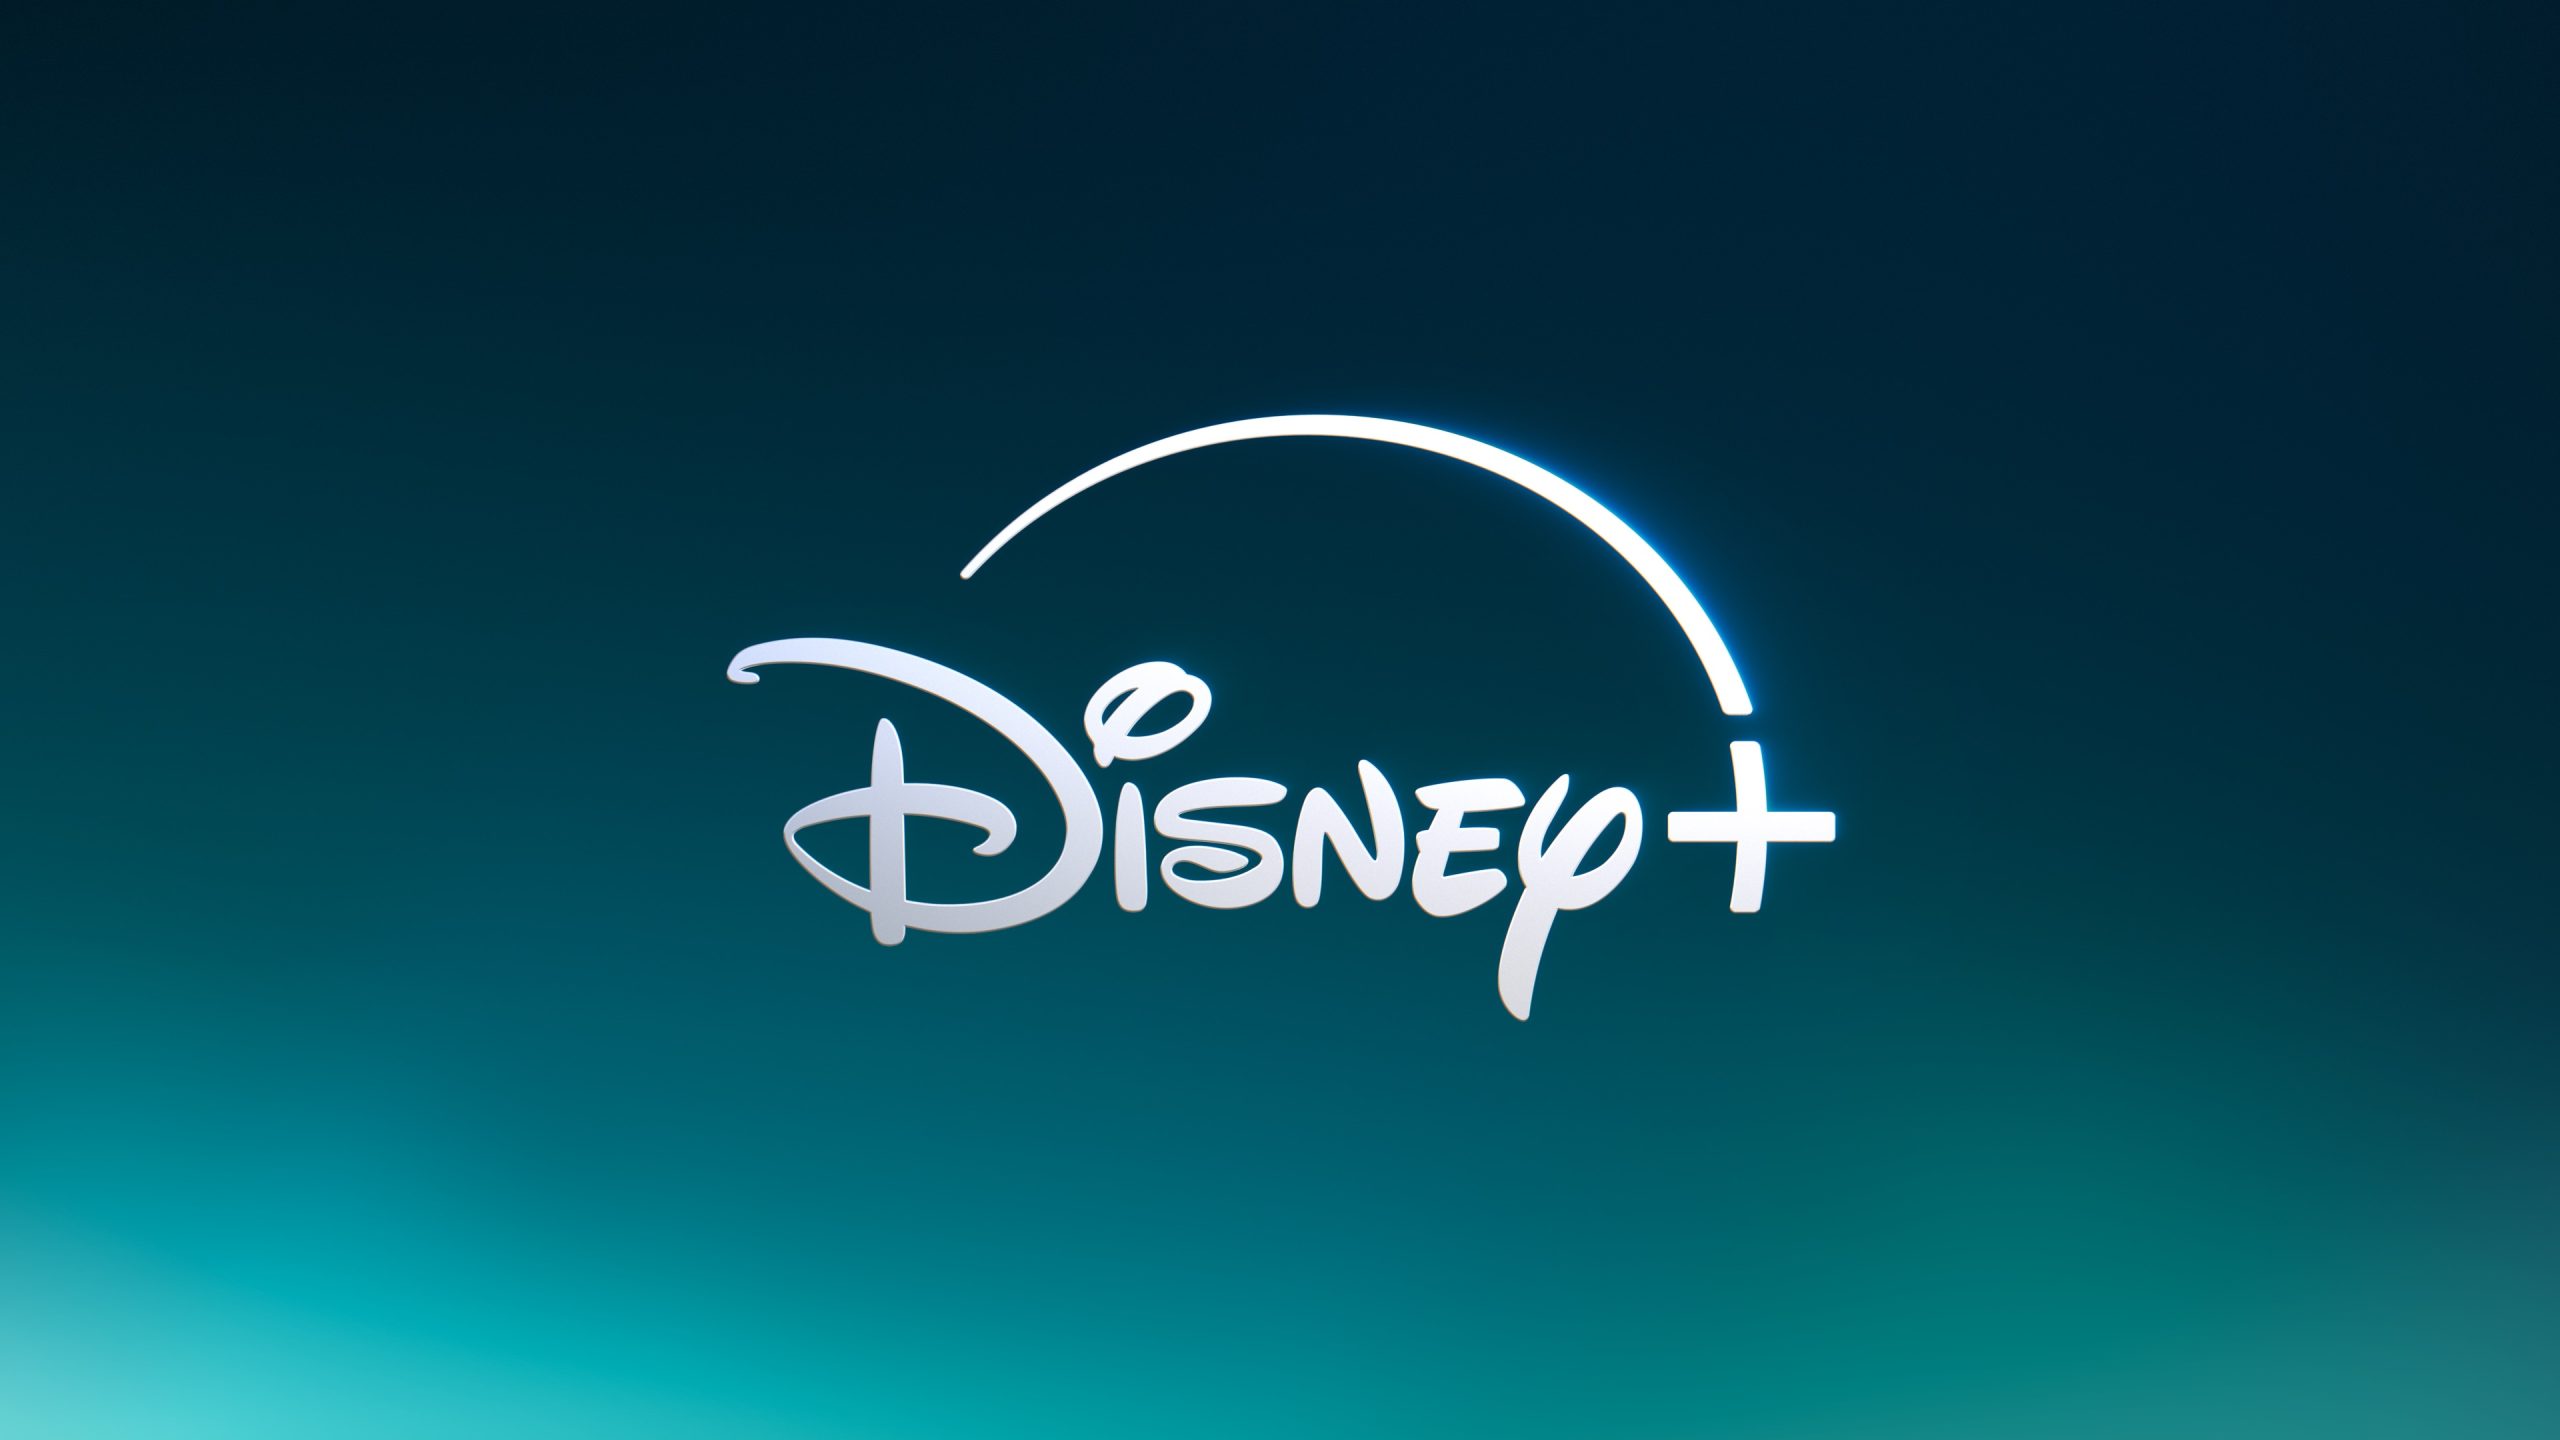 Disney+ Becomes the New Danish and Swedish Home of UEFA Europe League and UEFA Conference League 2024-2027